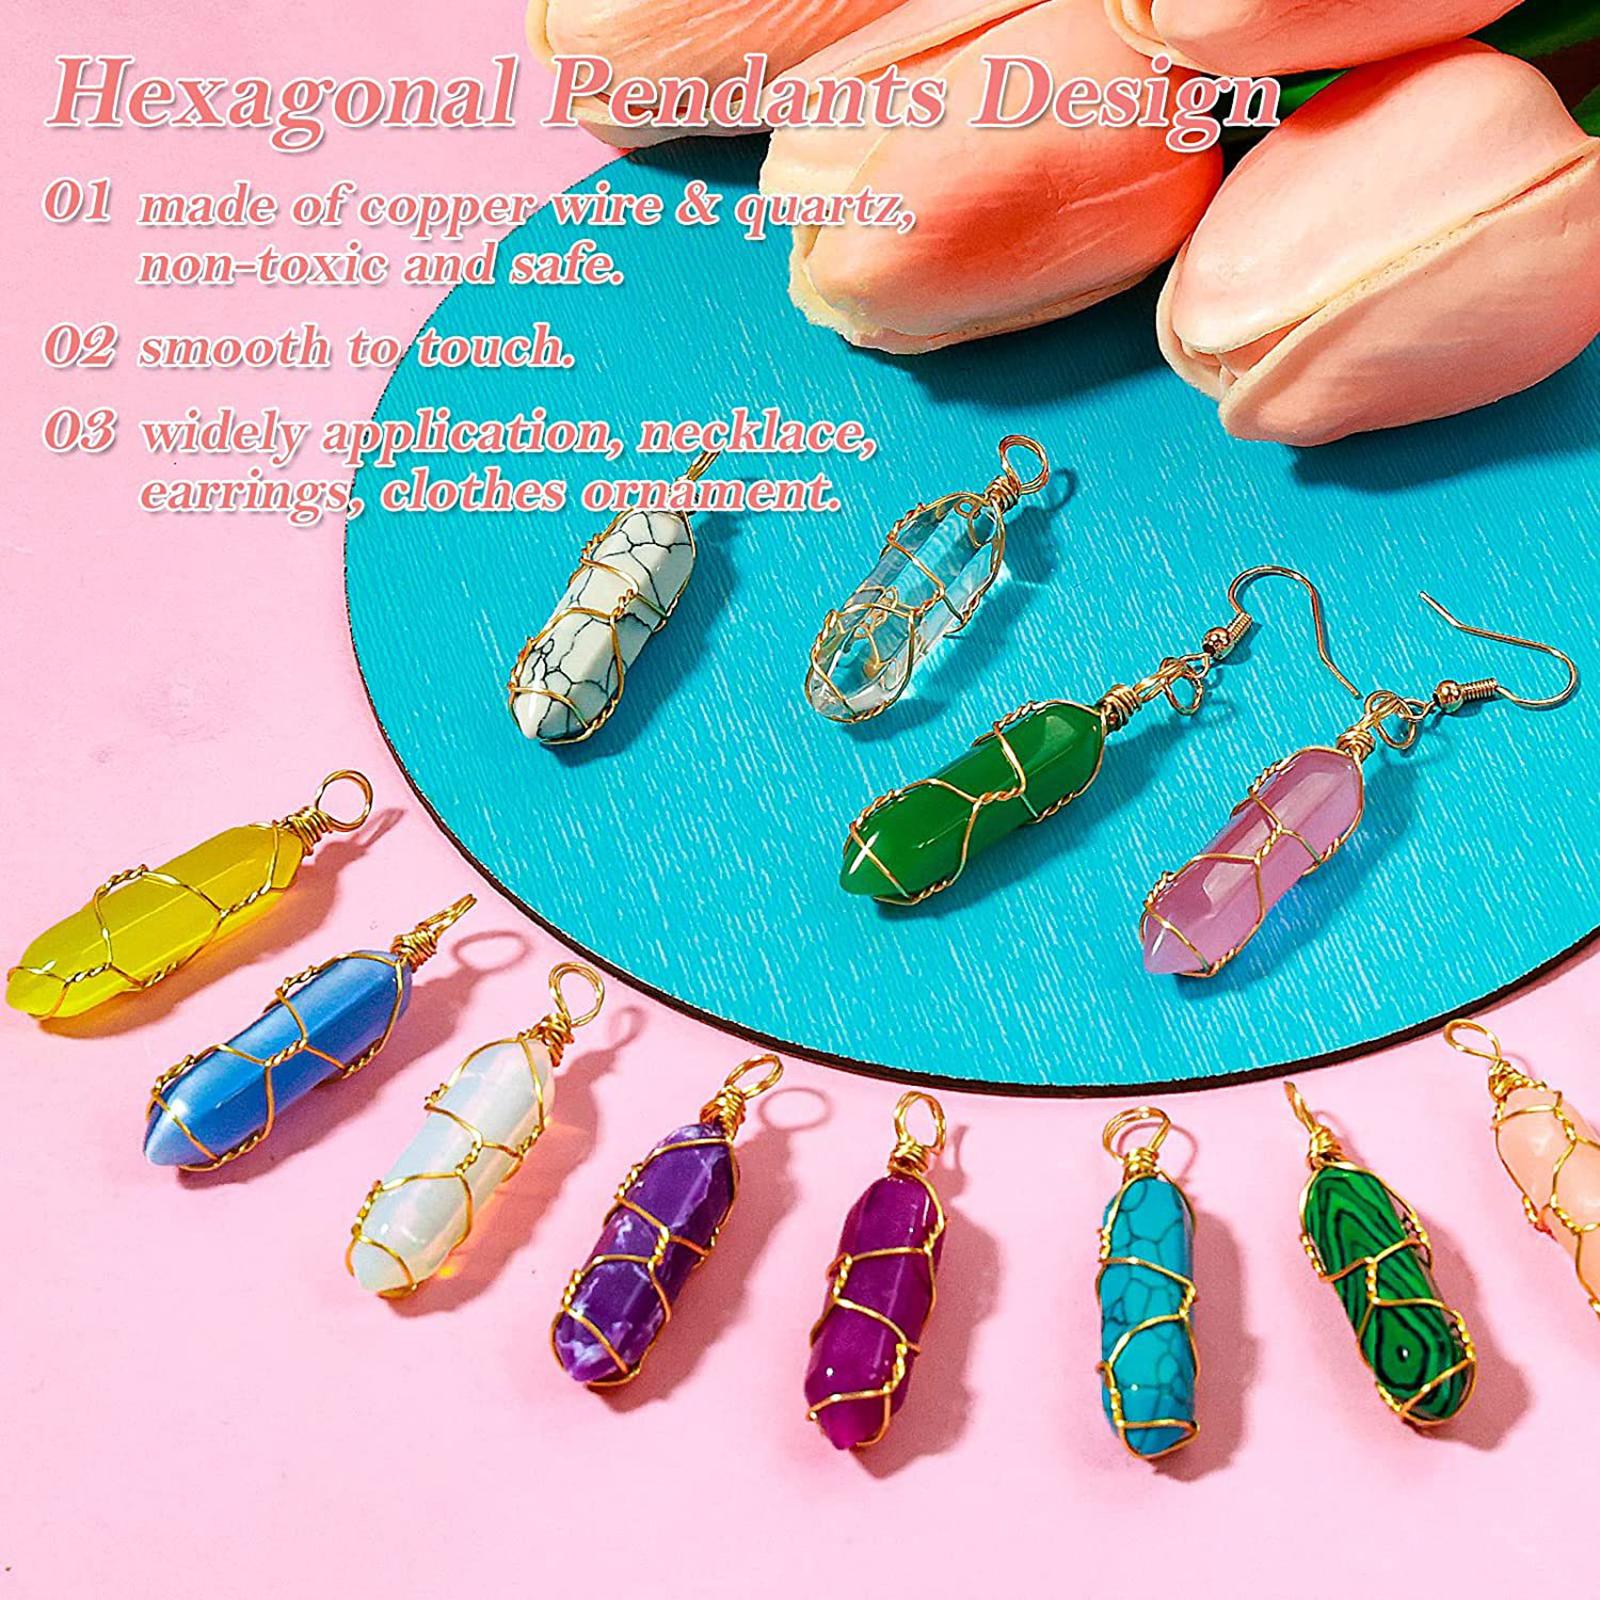 24x Hexagonal Pointed Crystal Earrings Charms with Cords for Women Girls